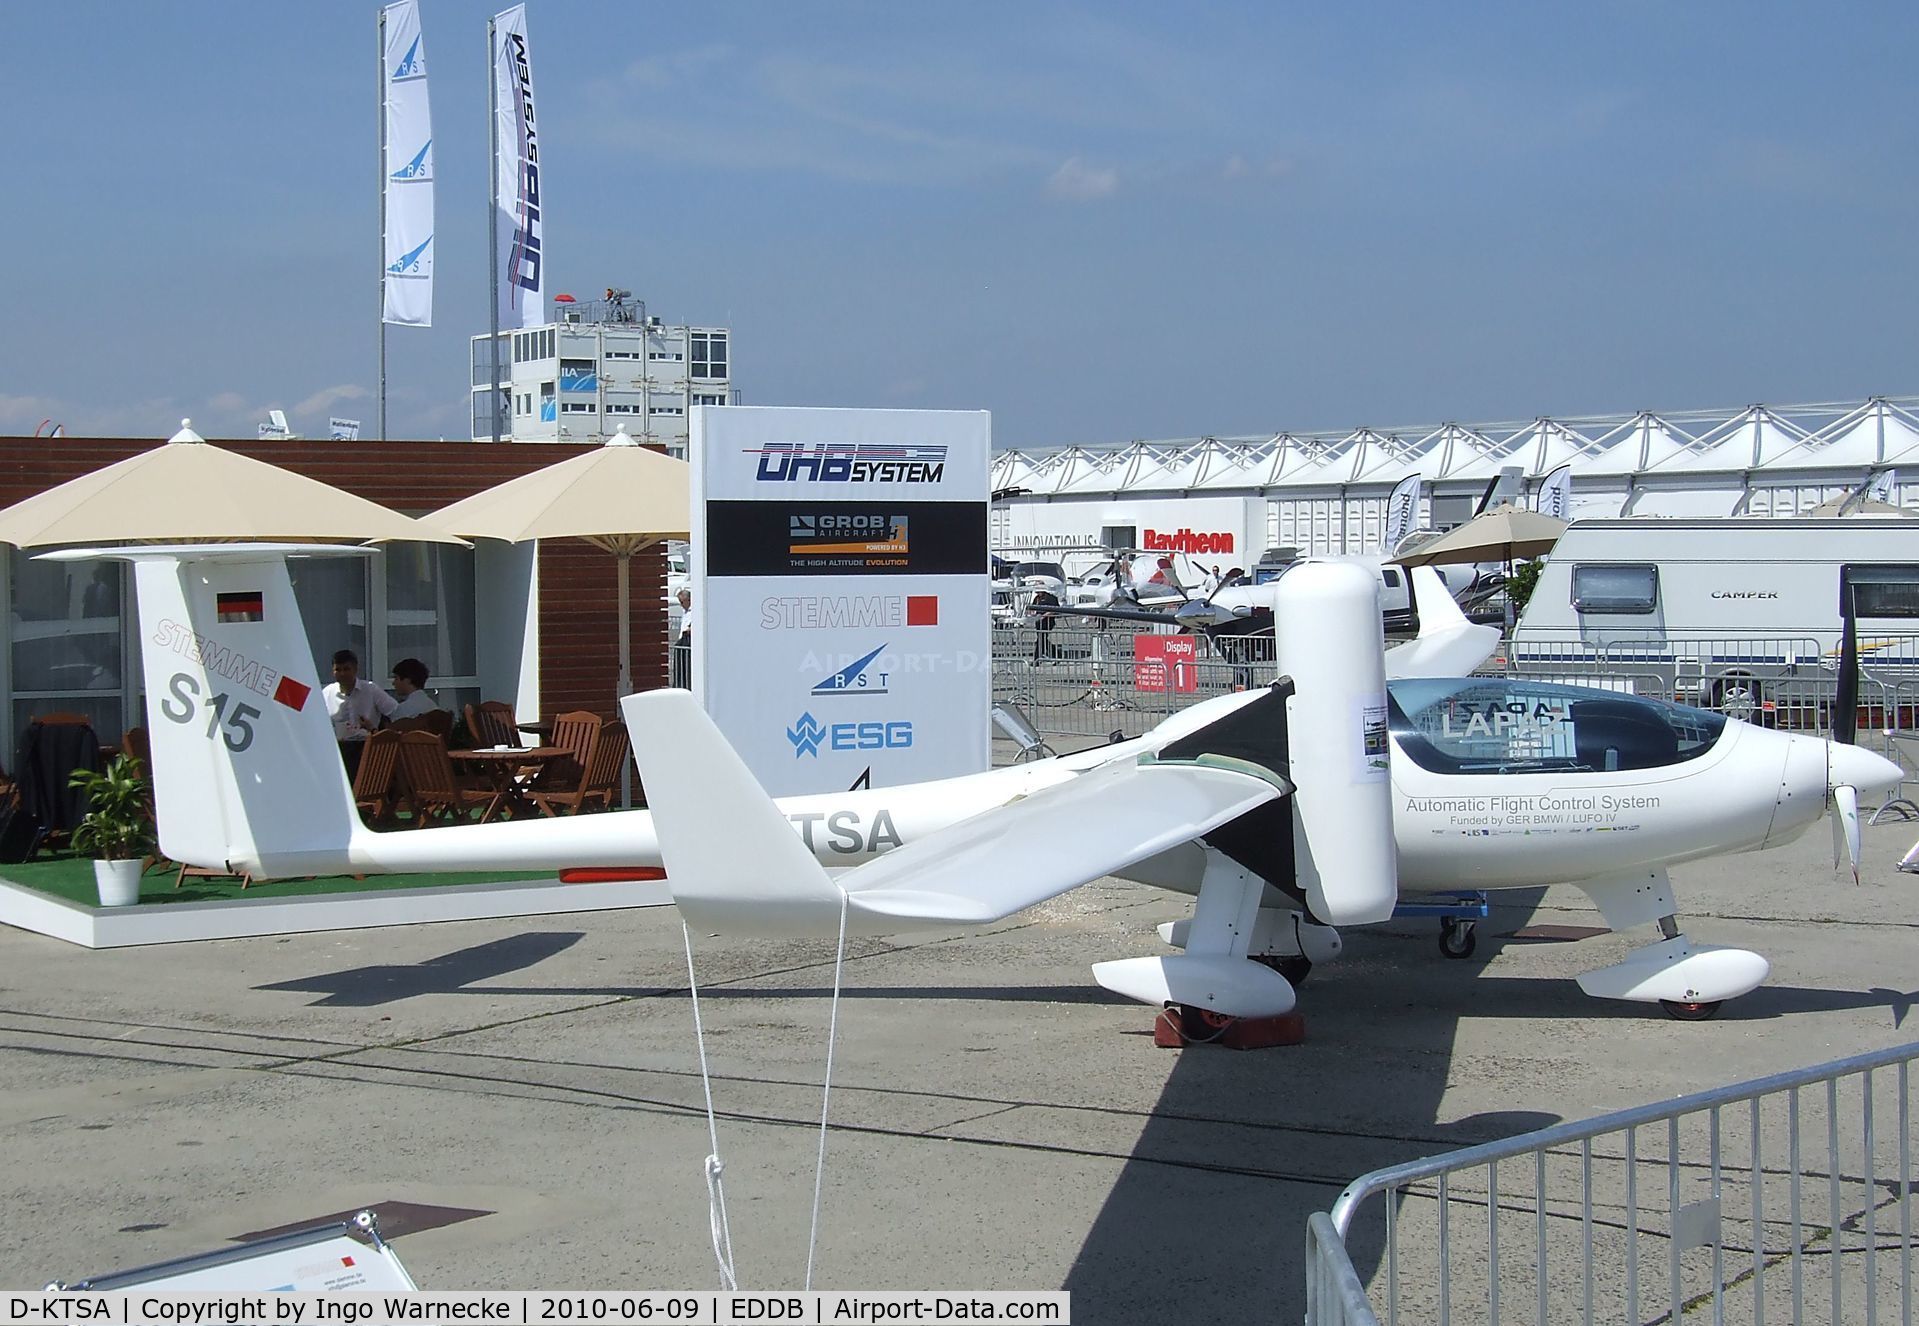 D-KTSA, Stemme S-6 C/N 001, Stemme S-15 (converted from prototype S-6) at ILA 2010, Berlin